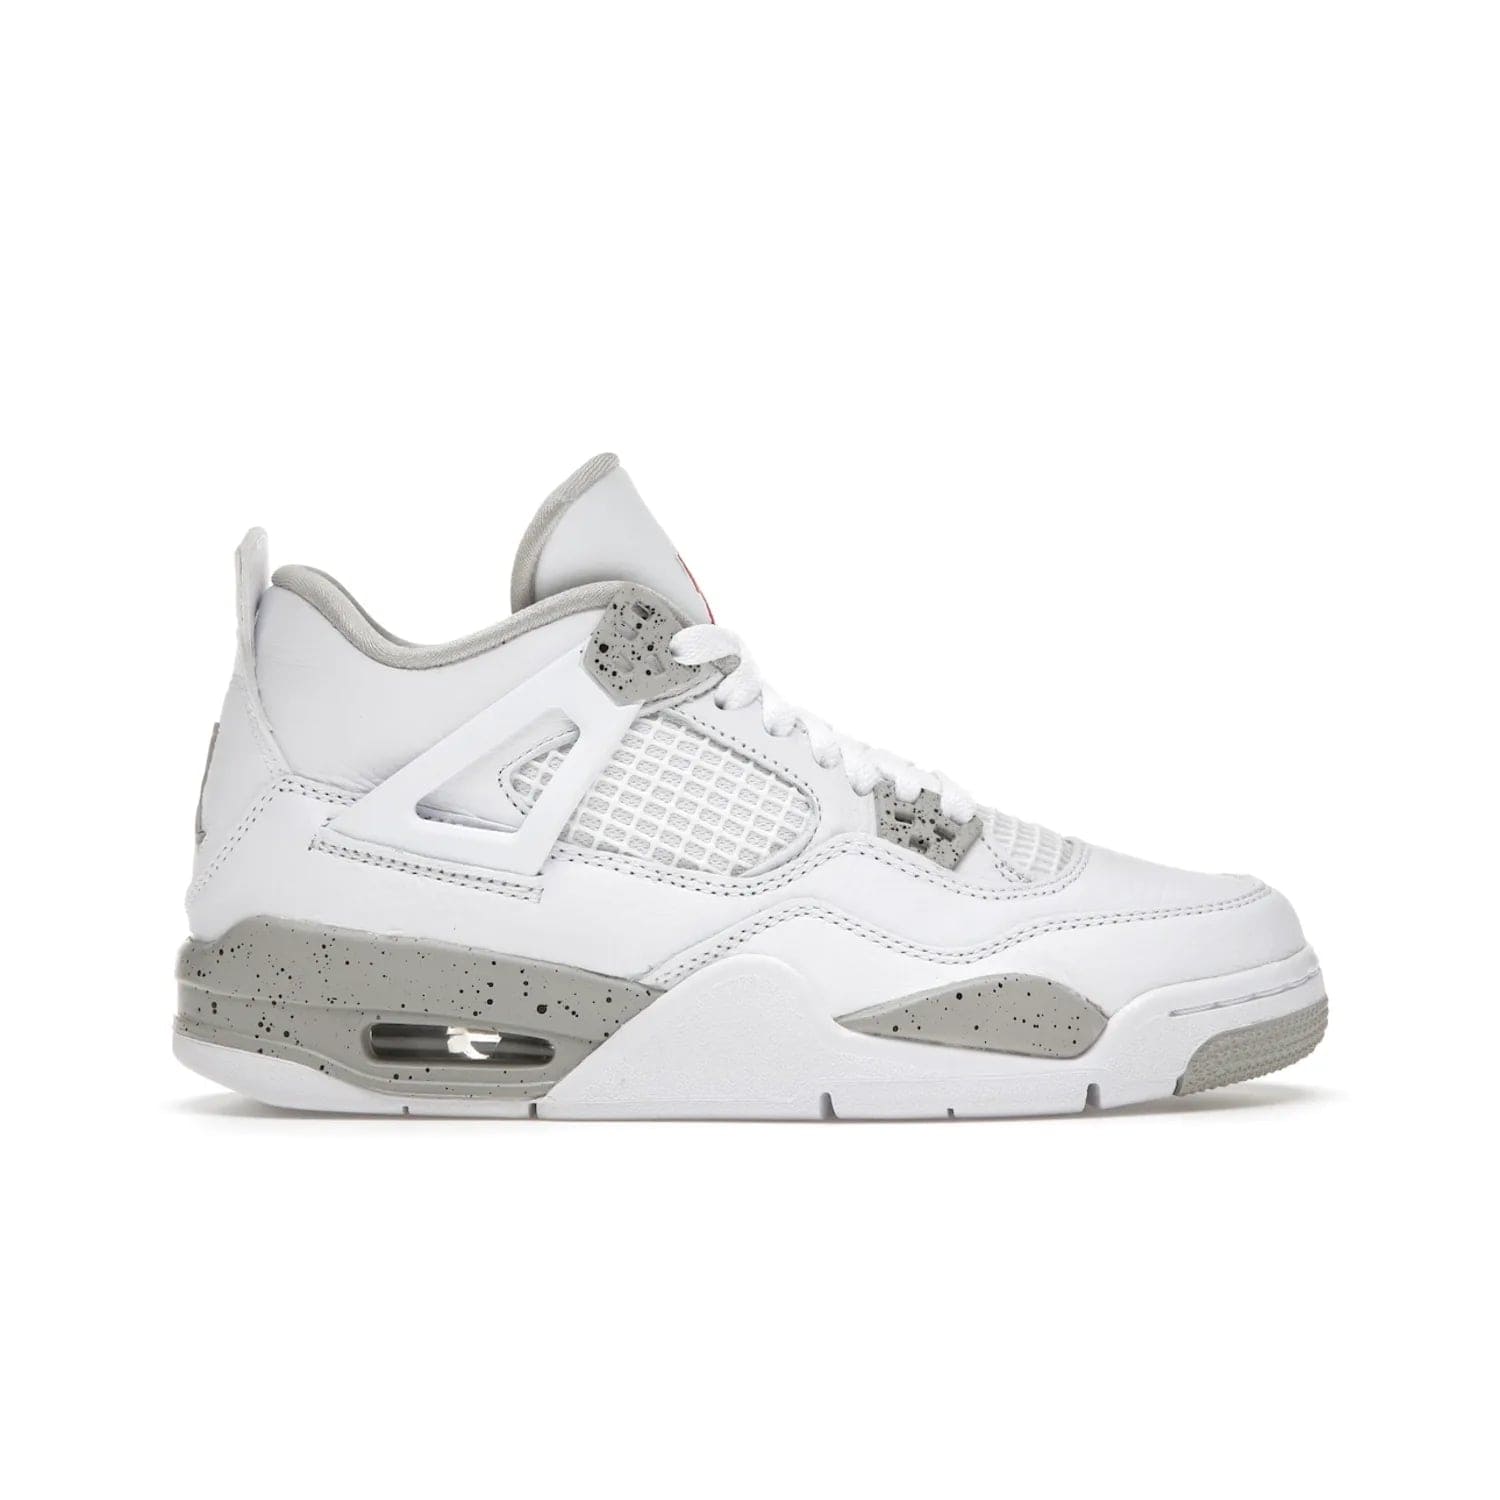 Jordan 4 Retro White Oreo (2021) (GS) - Image 1 - Only at www.BallersClubKickz.com - White Oreo Air Jordan 4 Retro 2021 GS - Iconic sneaker silhouette with white canvas upper, Tech Grey detailing, and Fire Red accents. Available July 2021.